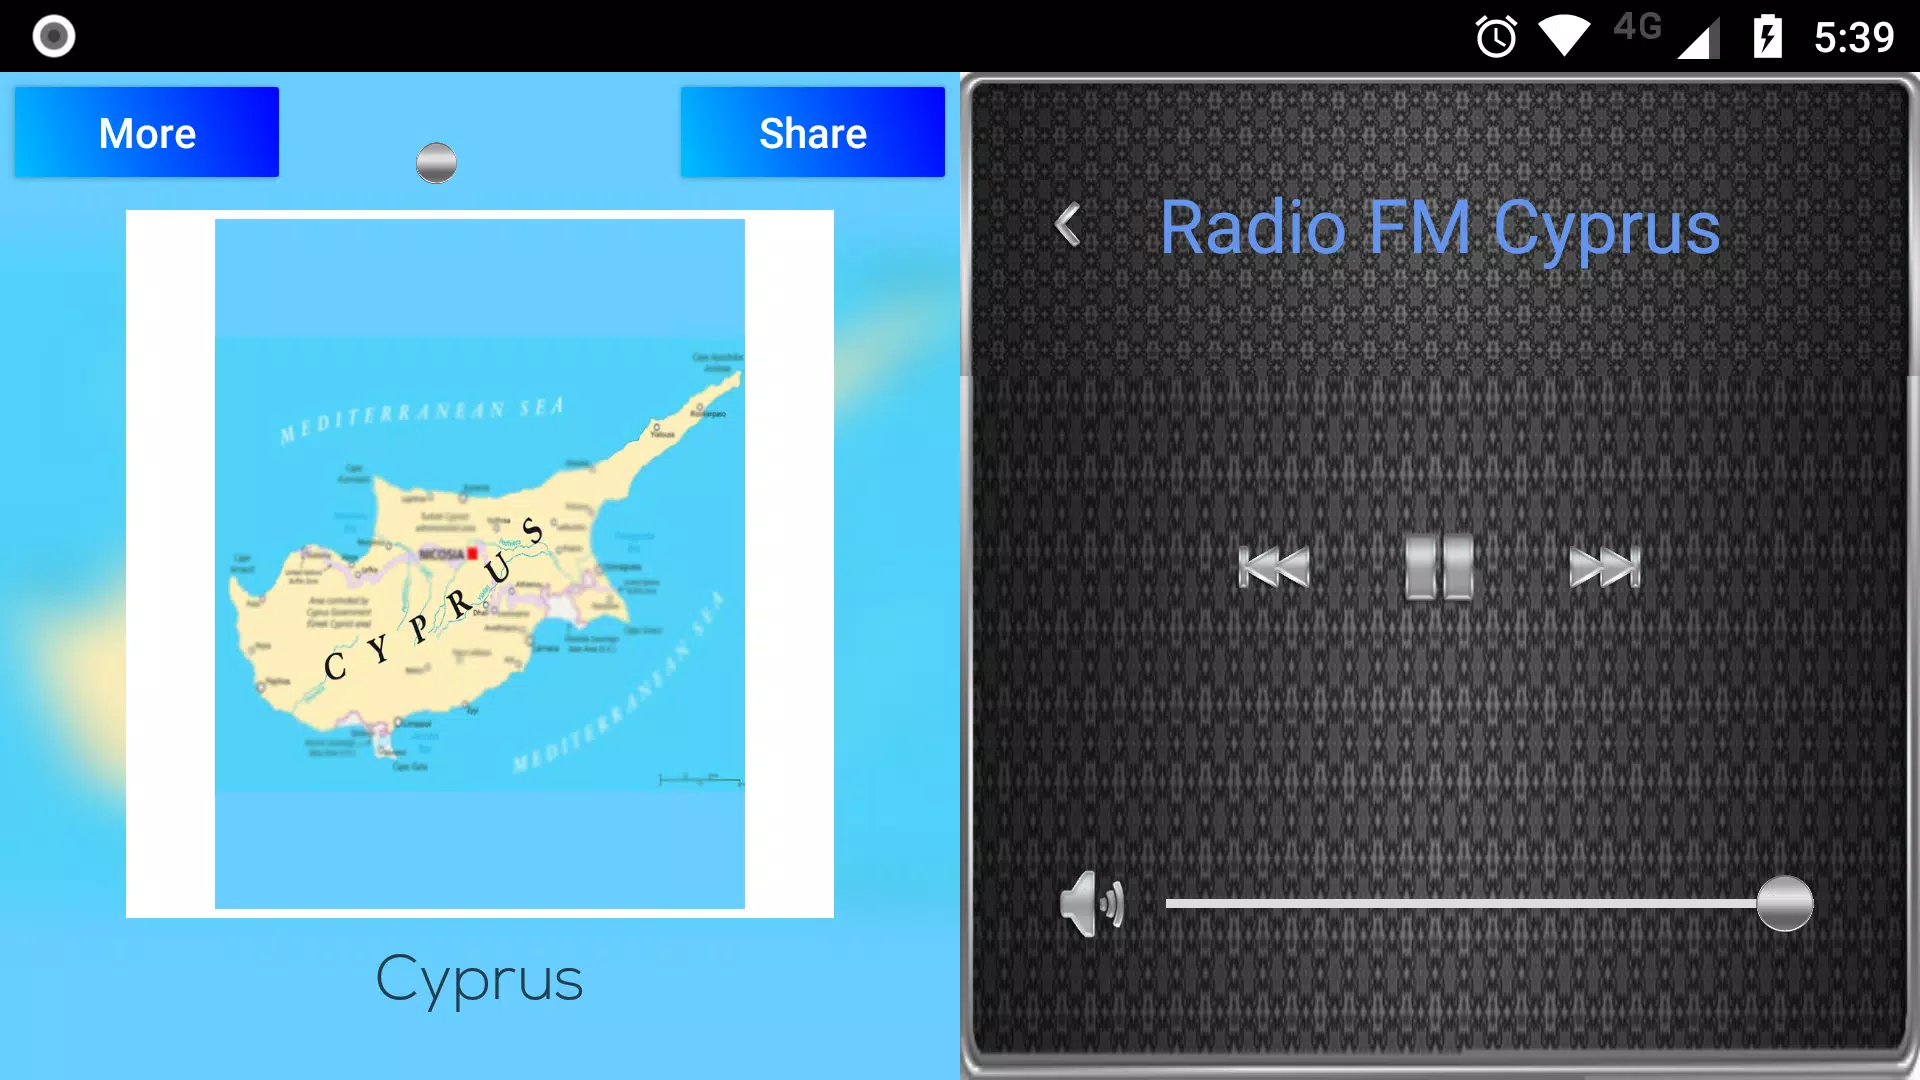 Radio FM Cyprus for Android - APK Download